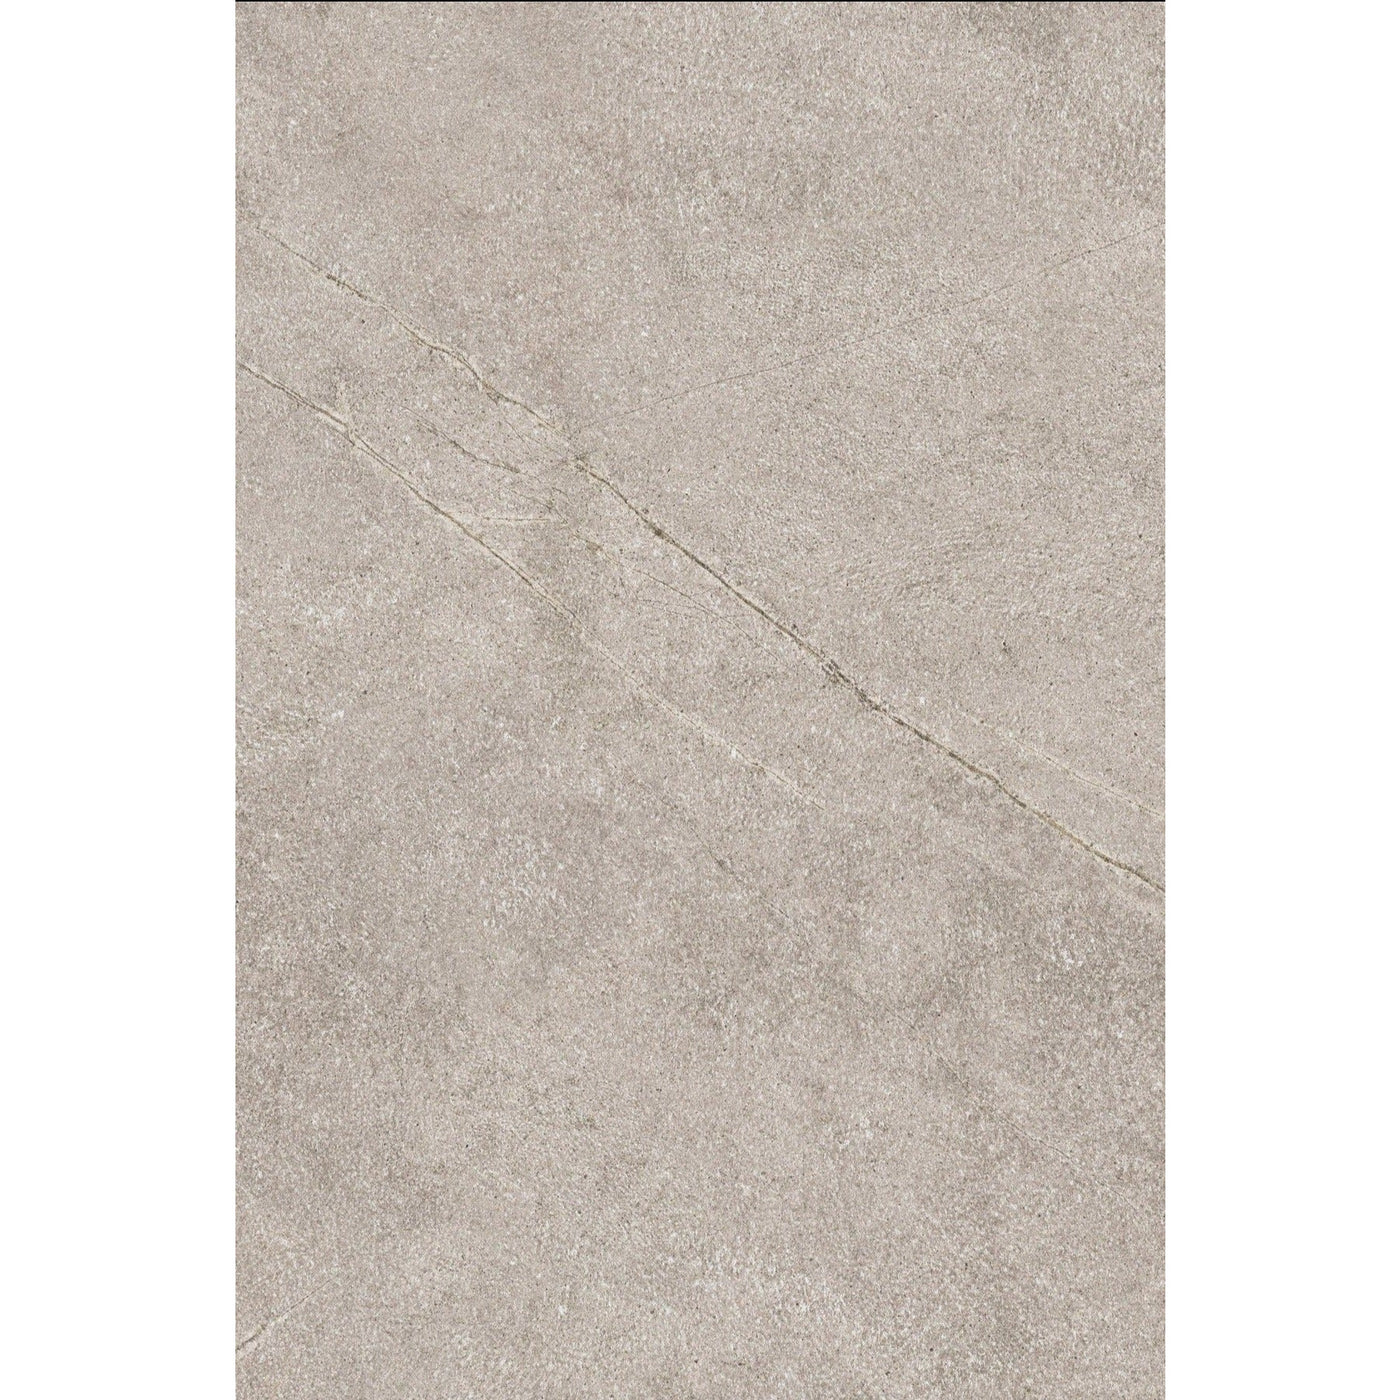 Hammered Sand Tile - Perfect for creating a natural looking patio - Letta London - 